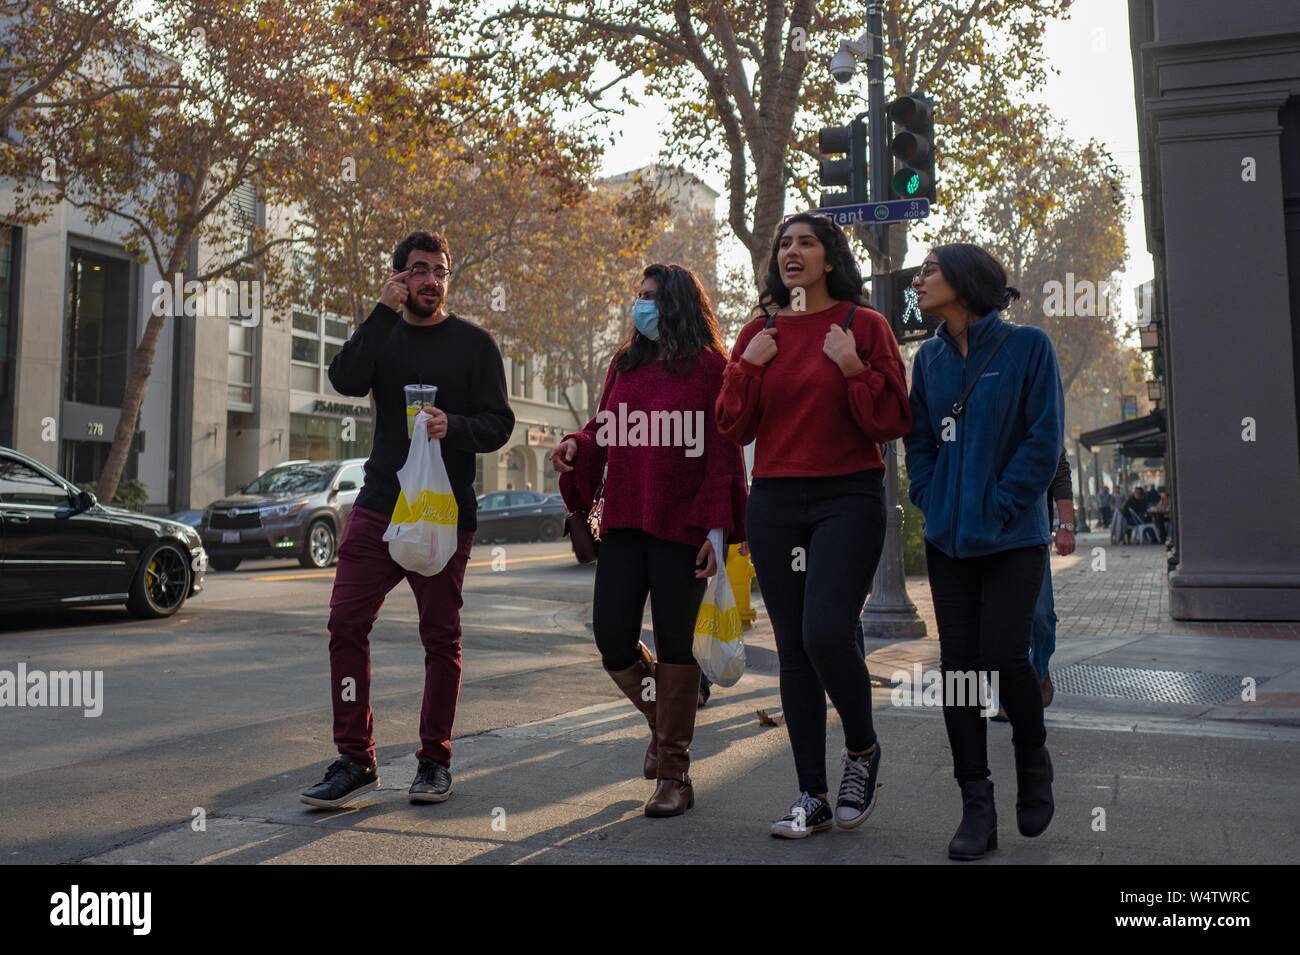 A group of Millennial generation friends holds takeout food bags and walks down University Avenue in the Silicon Valley, Palo Alto, California, with one woman wearing a surgical mask to protect against wildfire smoke from the 2018 Camp Wildfire, November 17, 2018. () Stock Photo